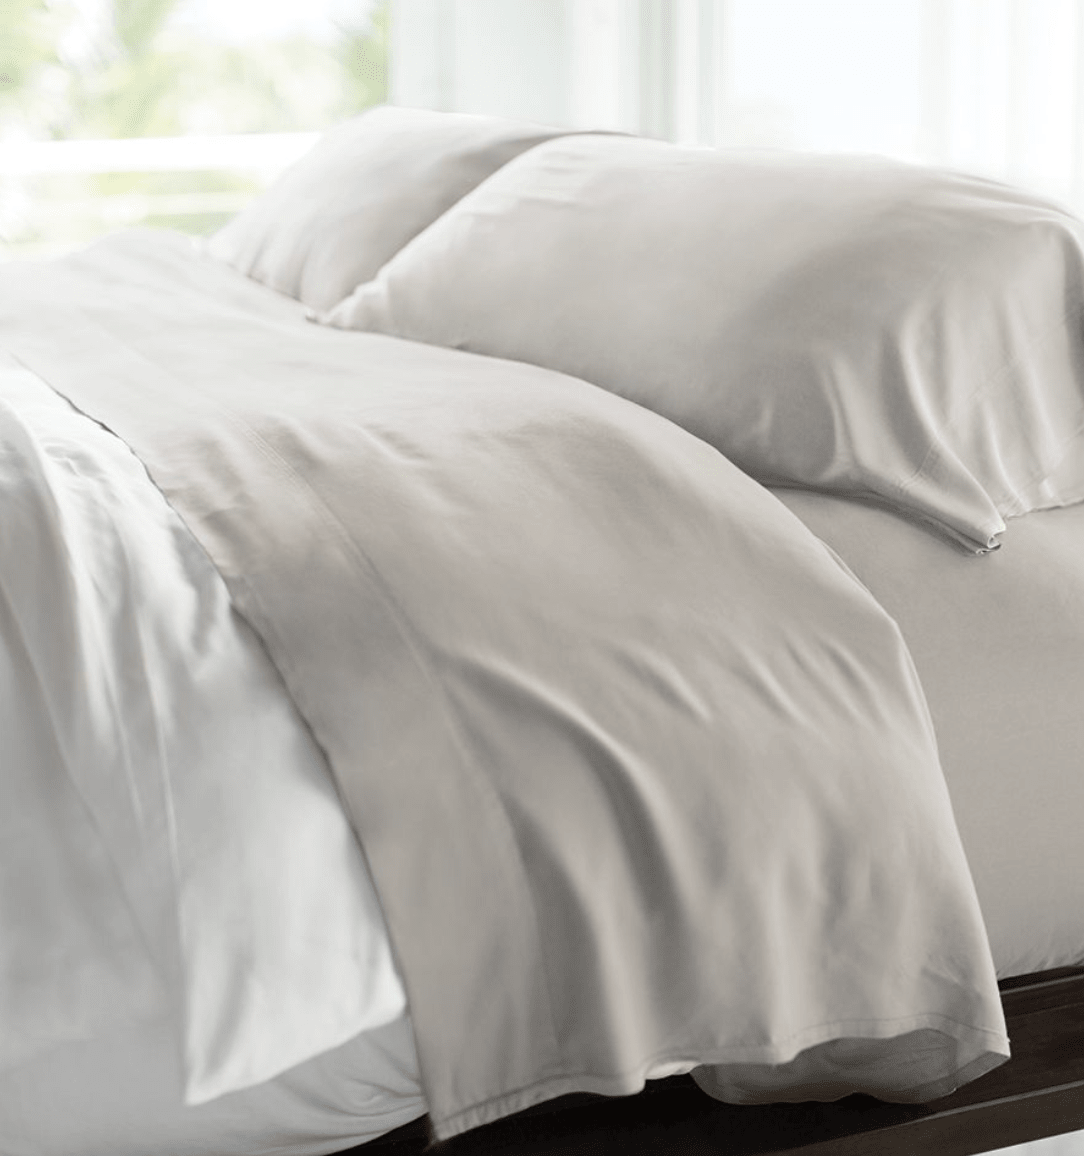 Are Bamboo Sheets Cooling? Choosing the Best Bedding For Hot Sleepers – Hush